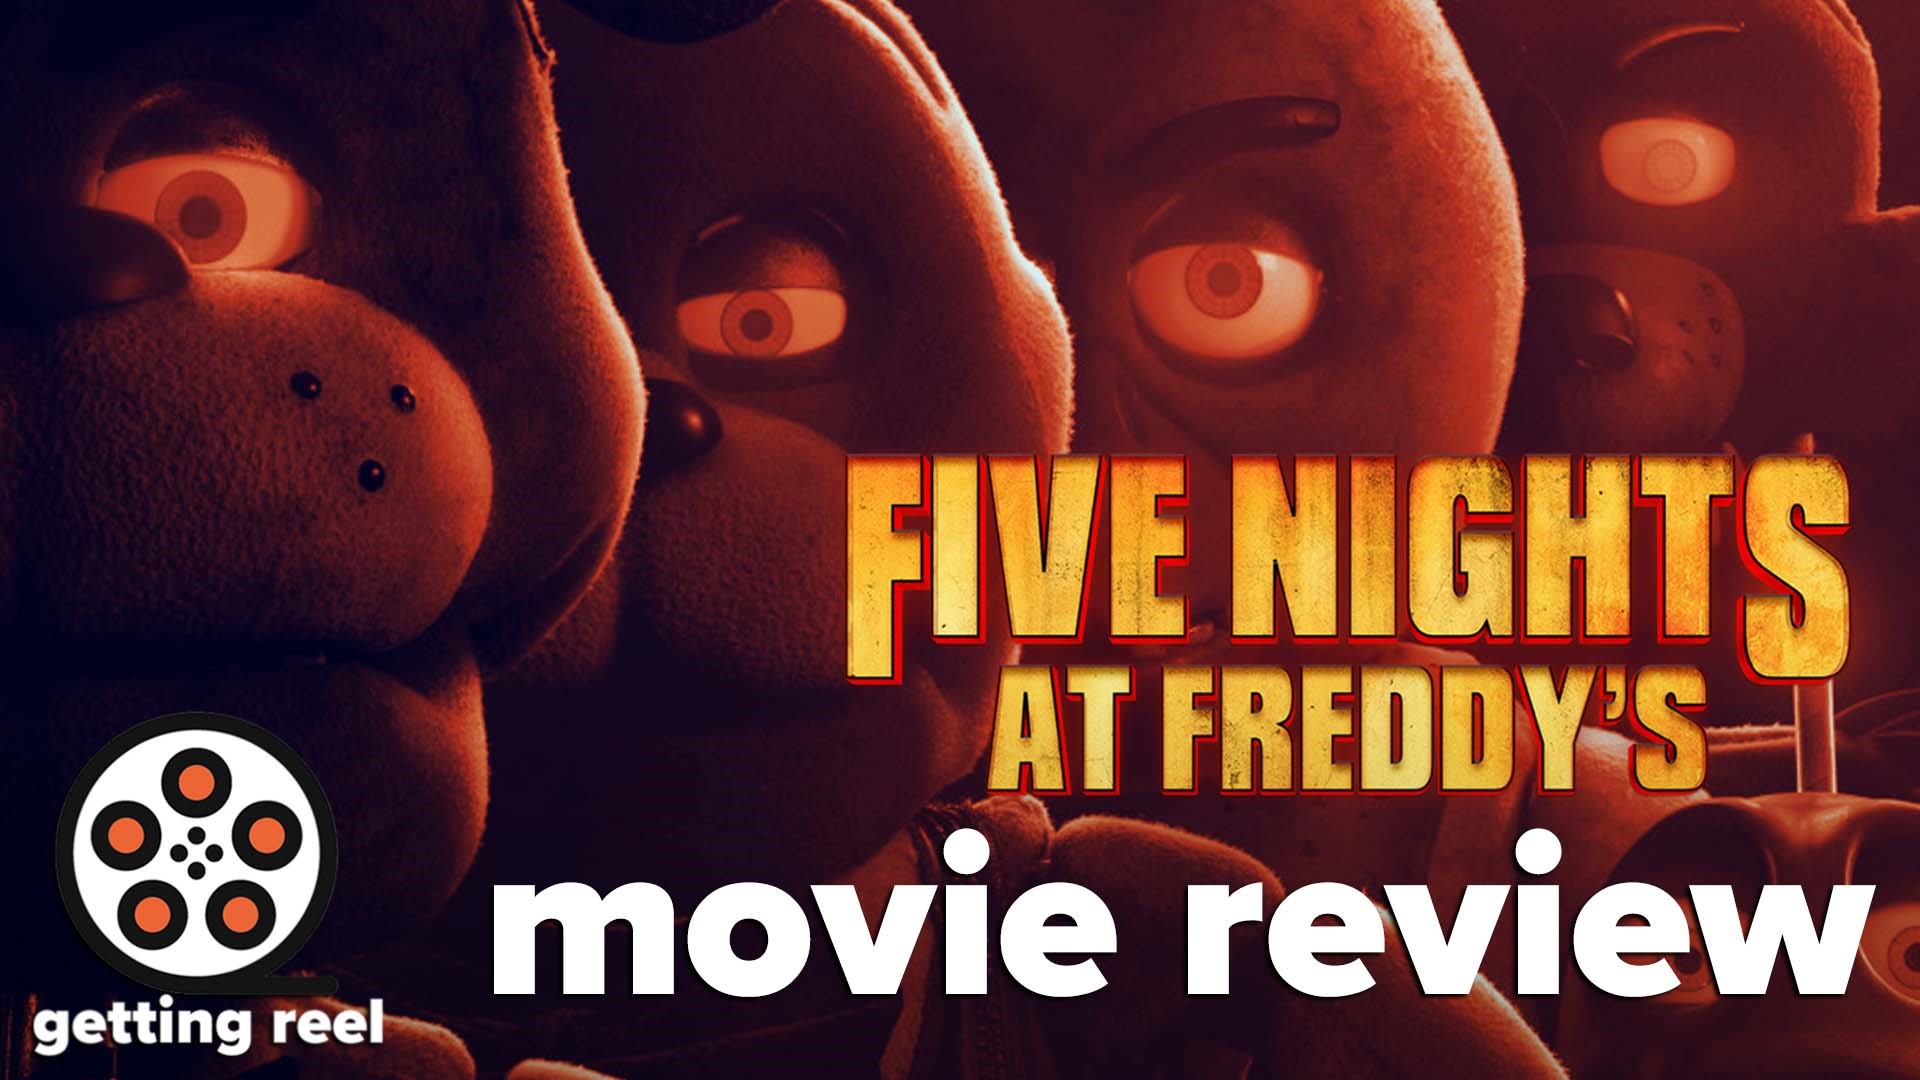 Movie review: “Five Nights at Freddy's”